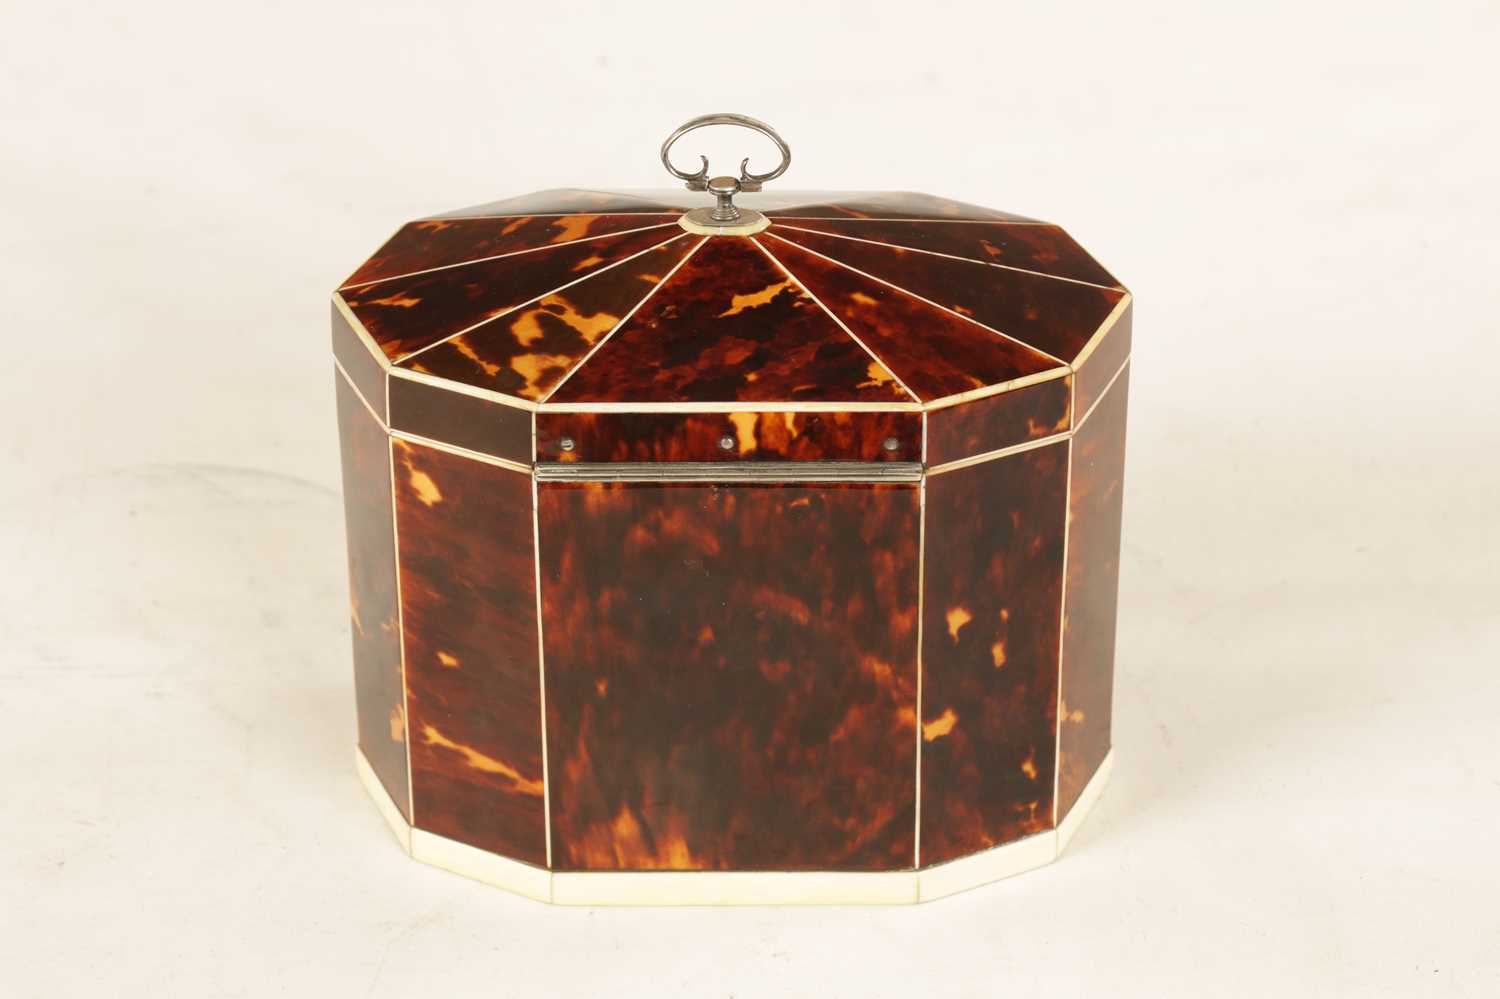 A FINE GEORGE III TORTOISHELL, IVORY AND SILVER MOUNTED TENT TOP TEA CADDY - Image 10 of 10